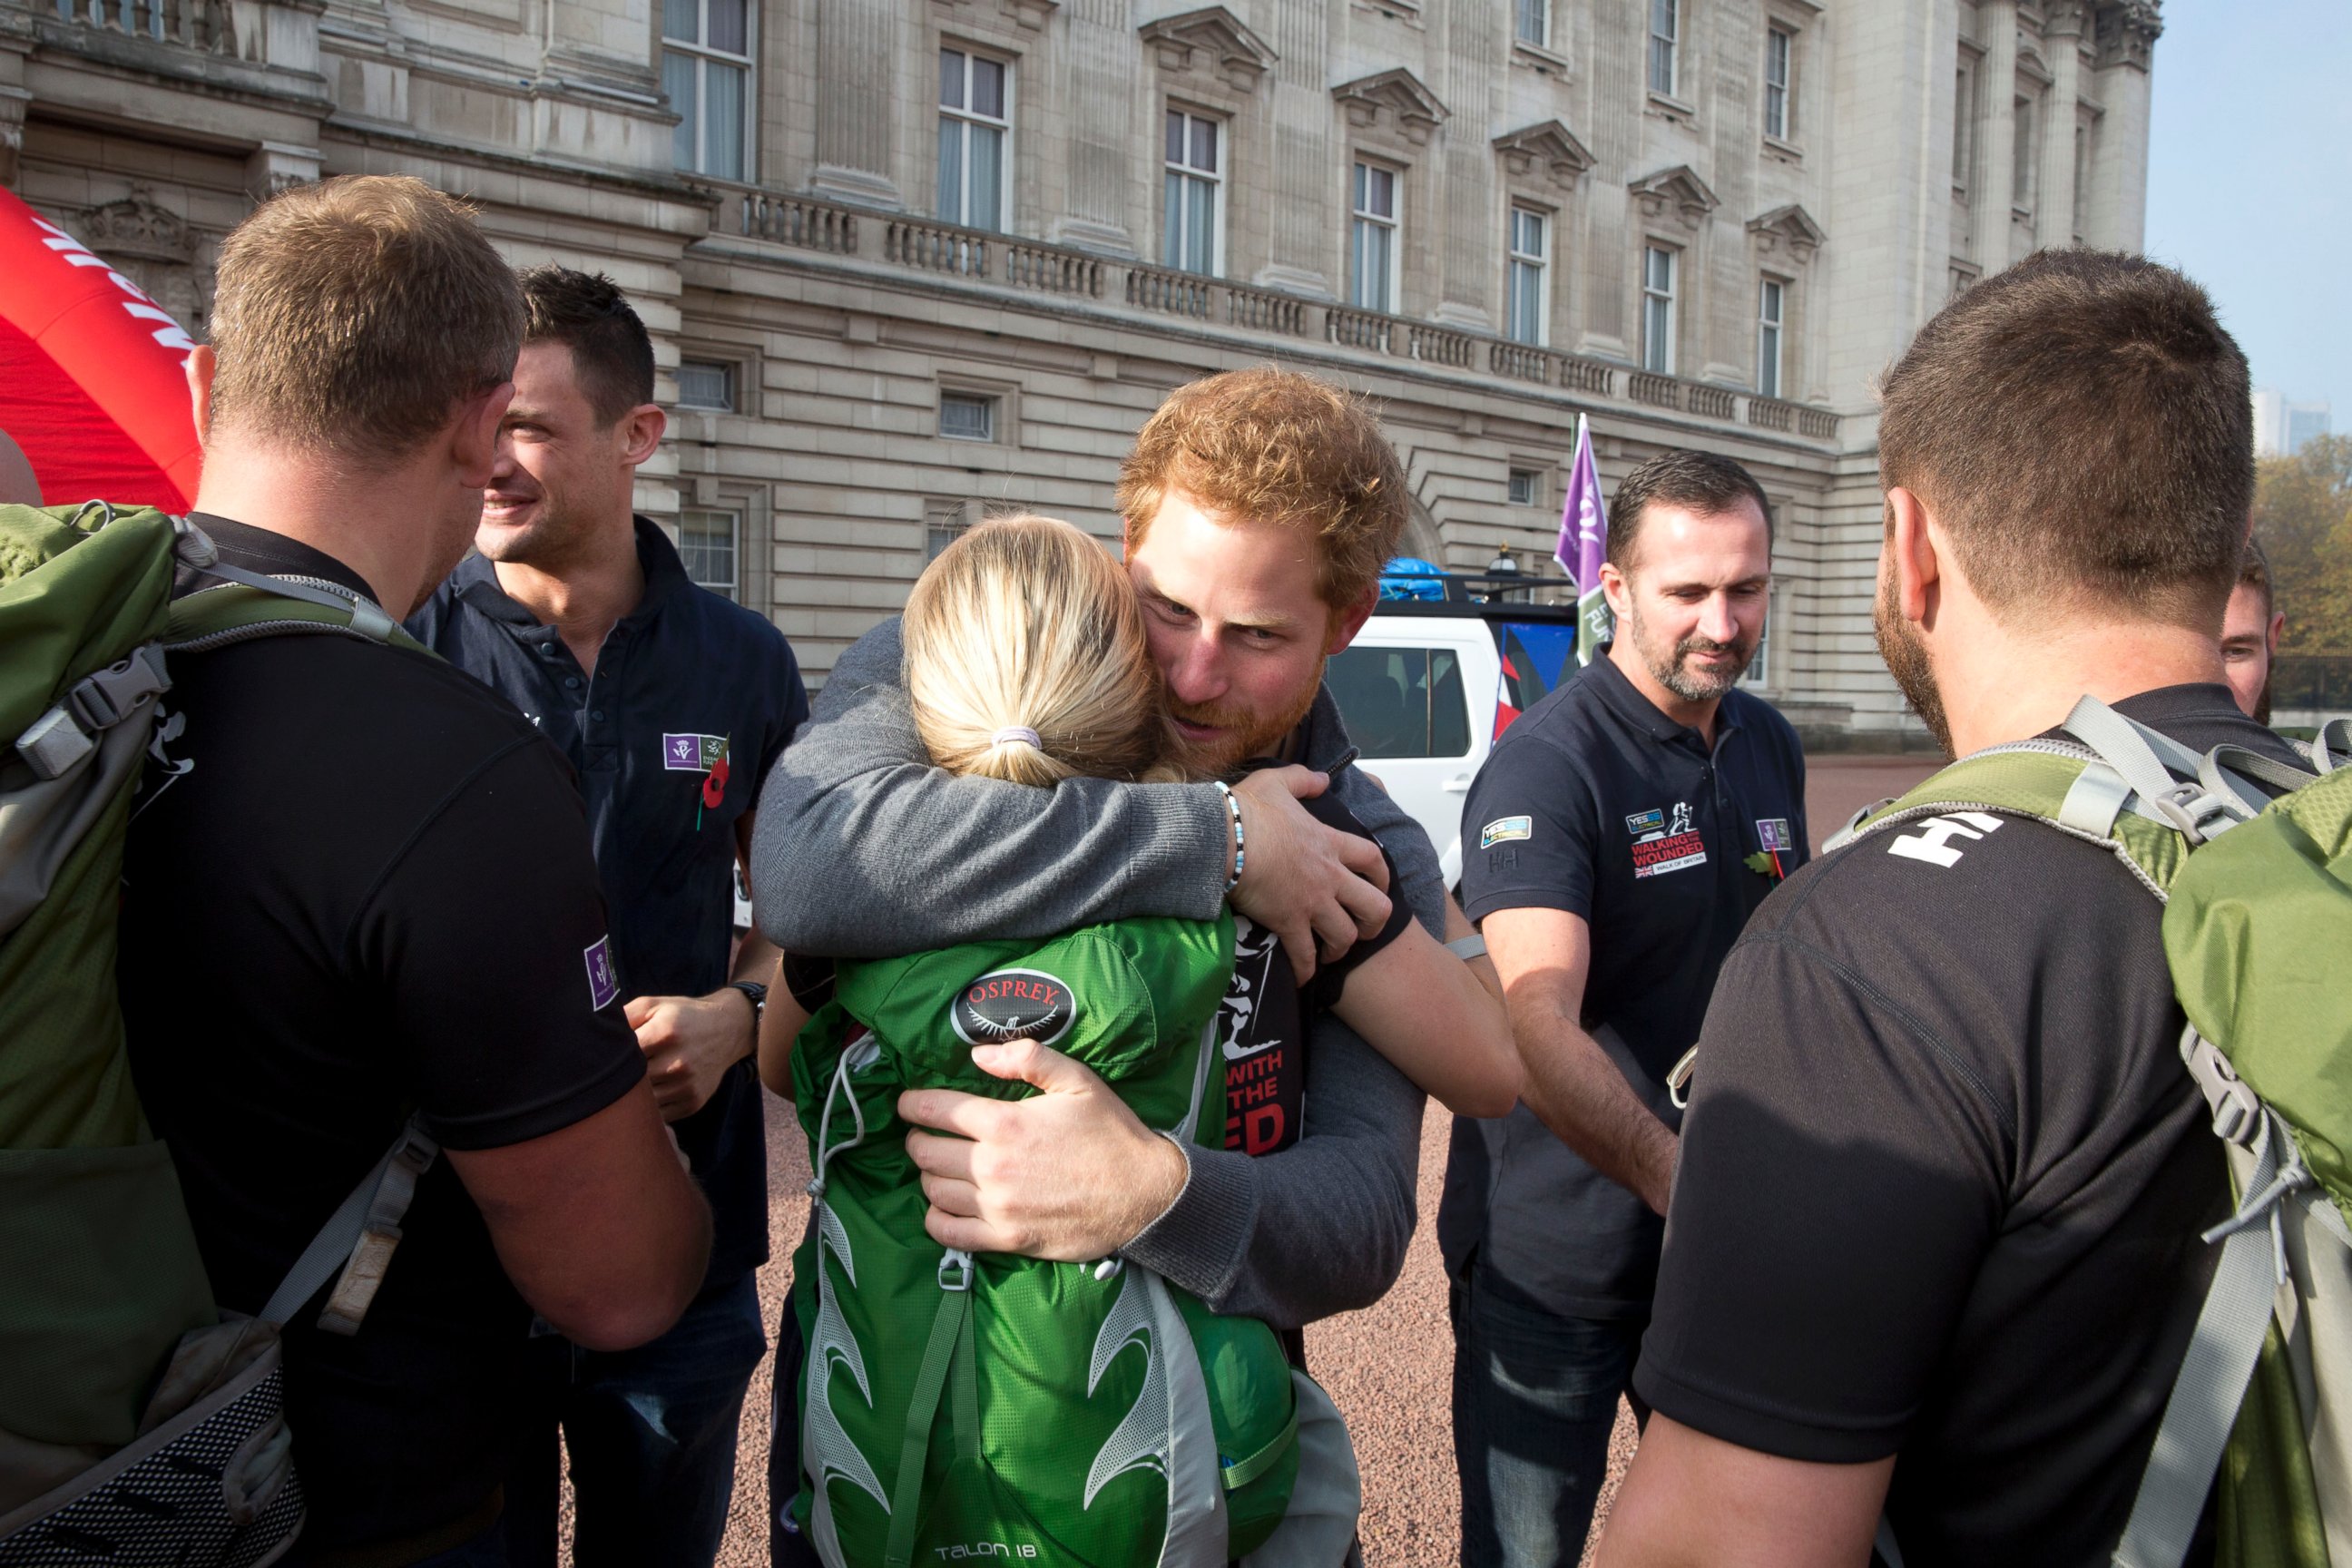 PHOTO: Prince Harry meets with members of the Walking With The Wounded team at Buckingham Palace after their latest endeavor, the Walk Of Britain, Nov. 1, 2015 in London.